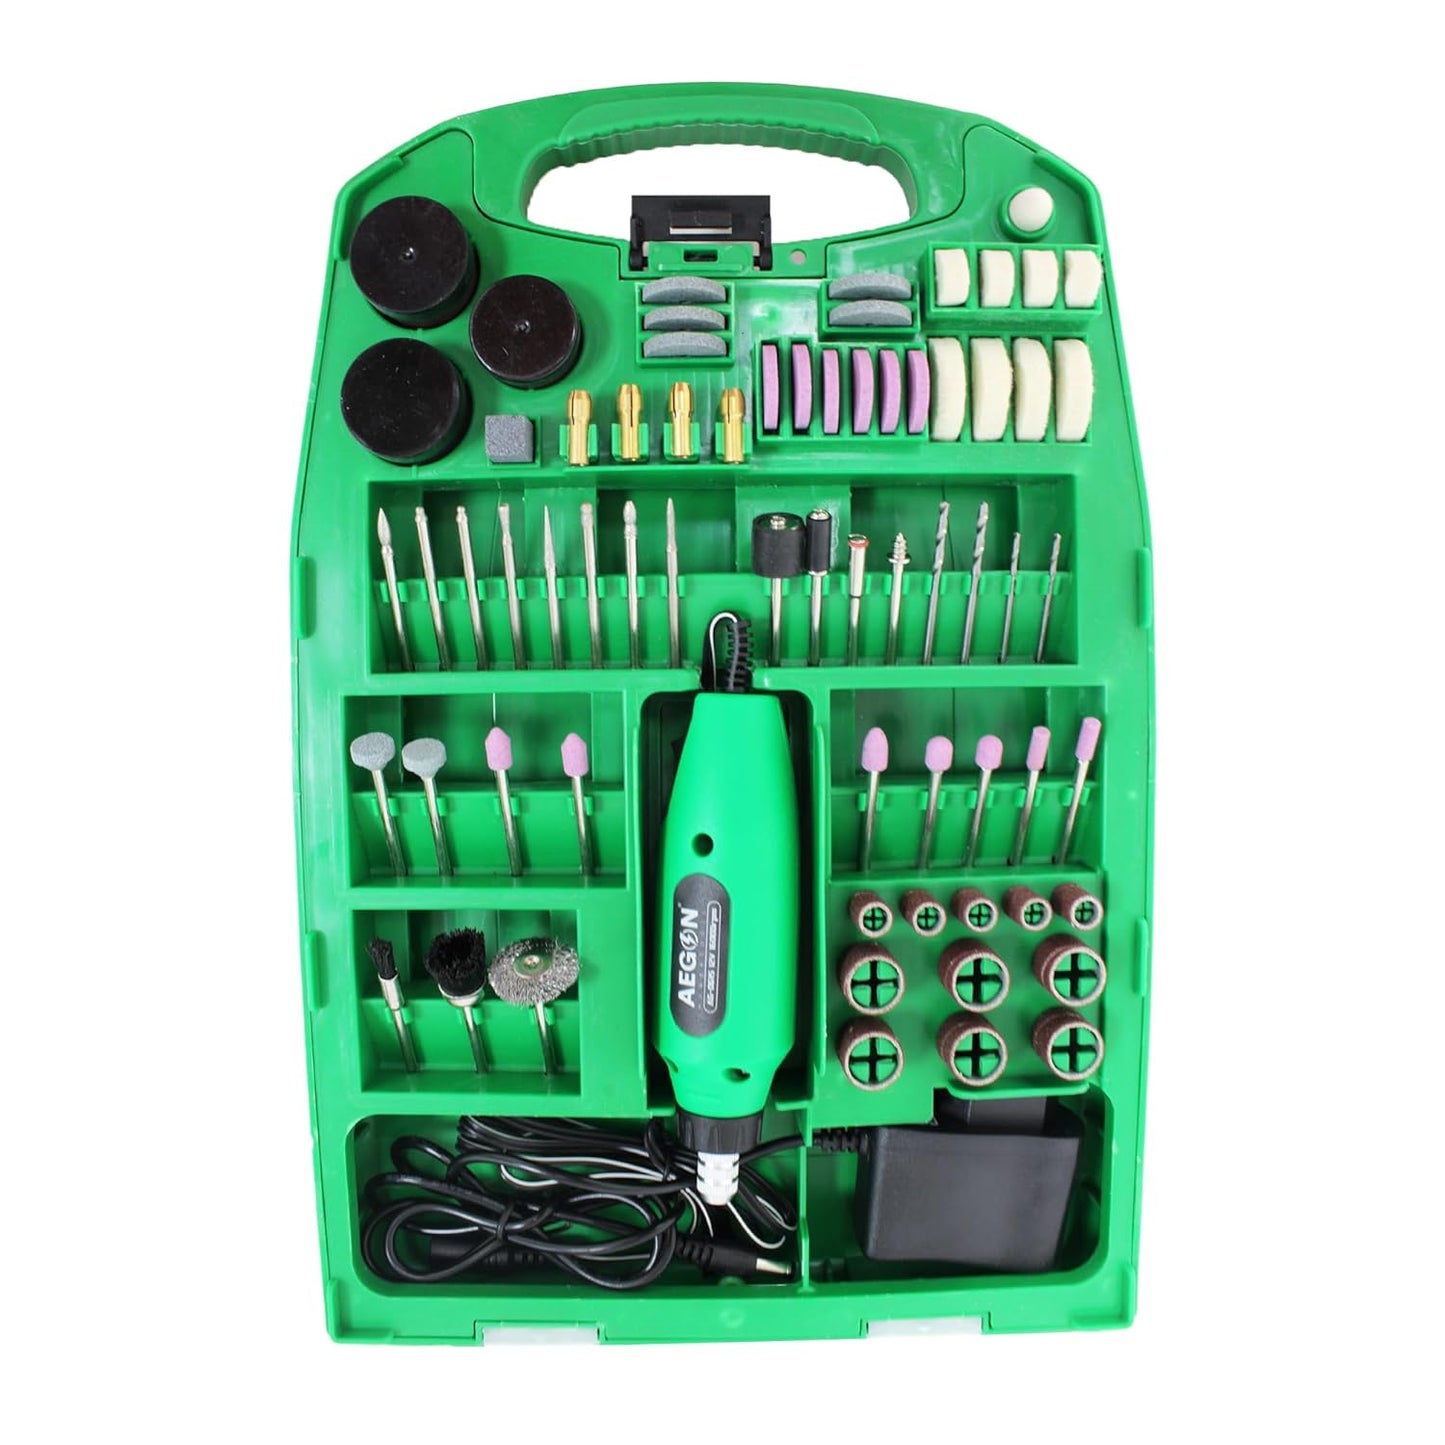 Aegon ProCraft Combo: Ultimate DIY Power Tool Set with Blower, Heat Gun, Angle Grinder, Die Grinder, and Drill Machine Kits